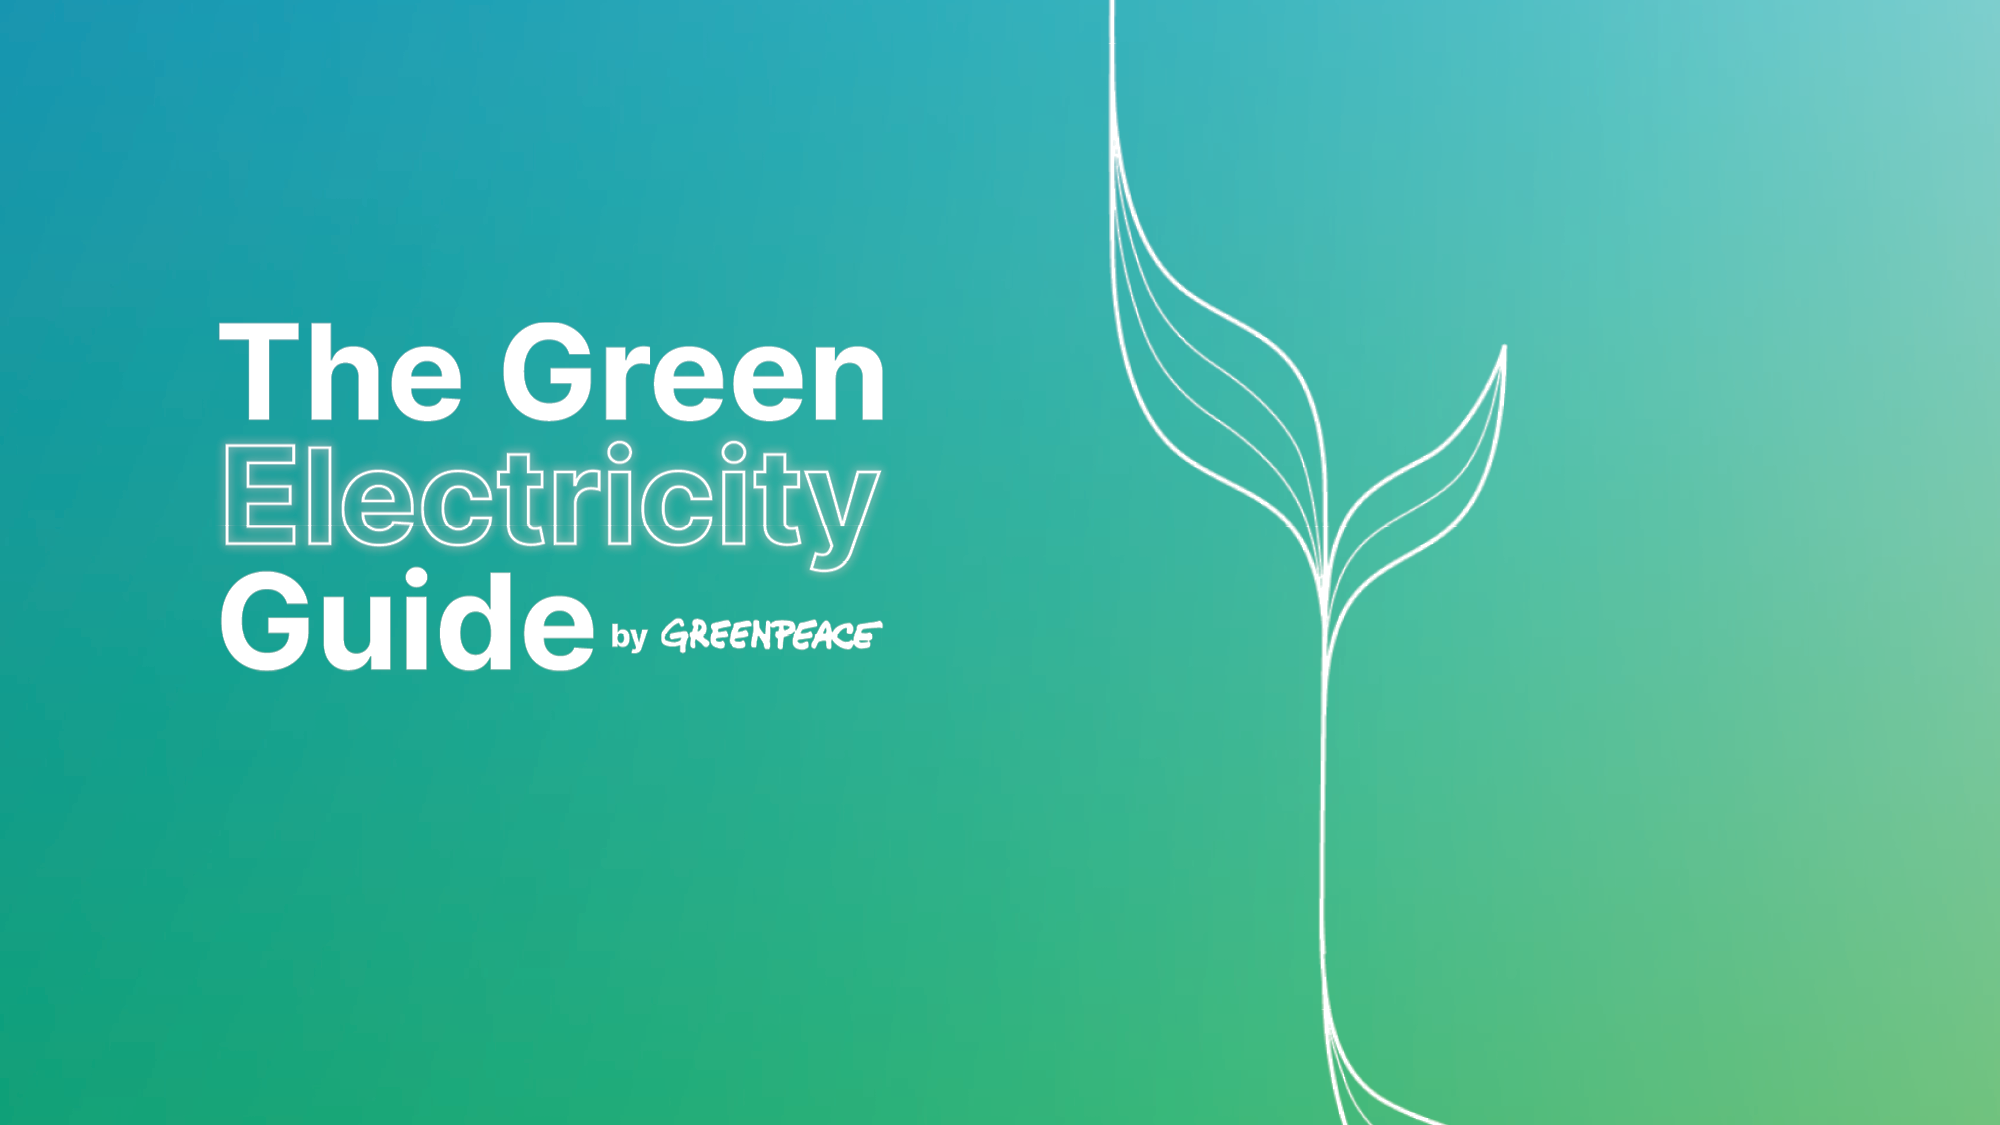 Greenpeace Green Electricity Guide